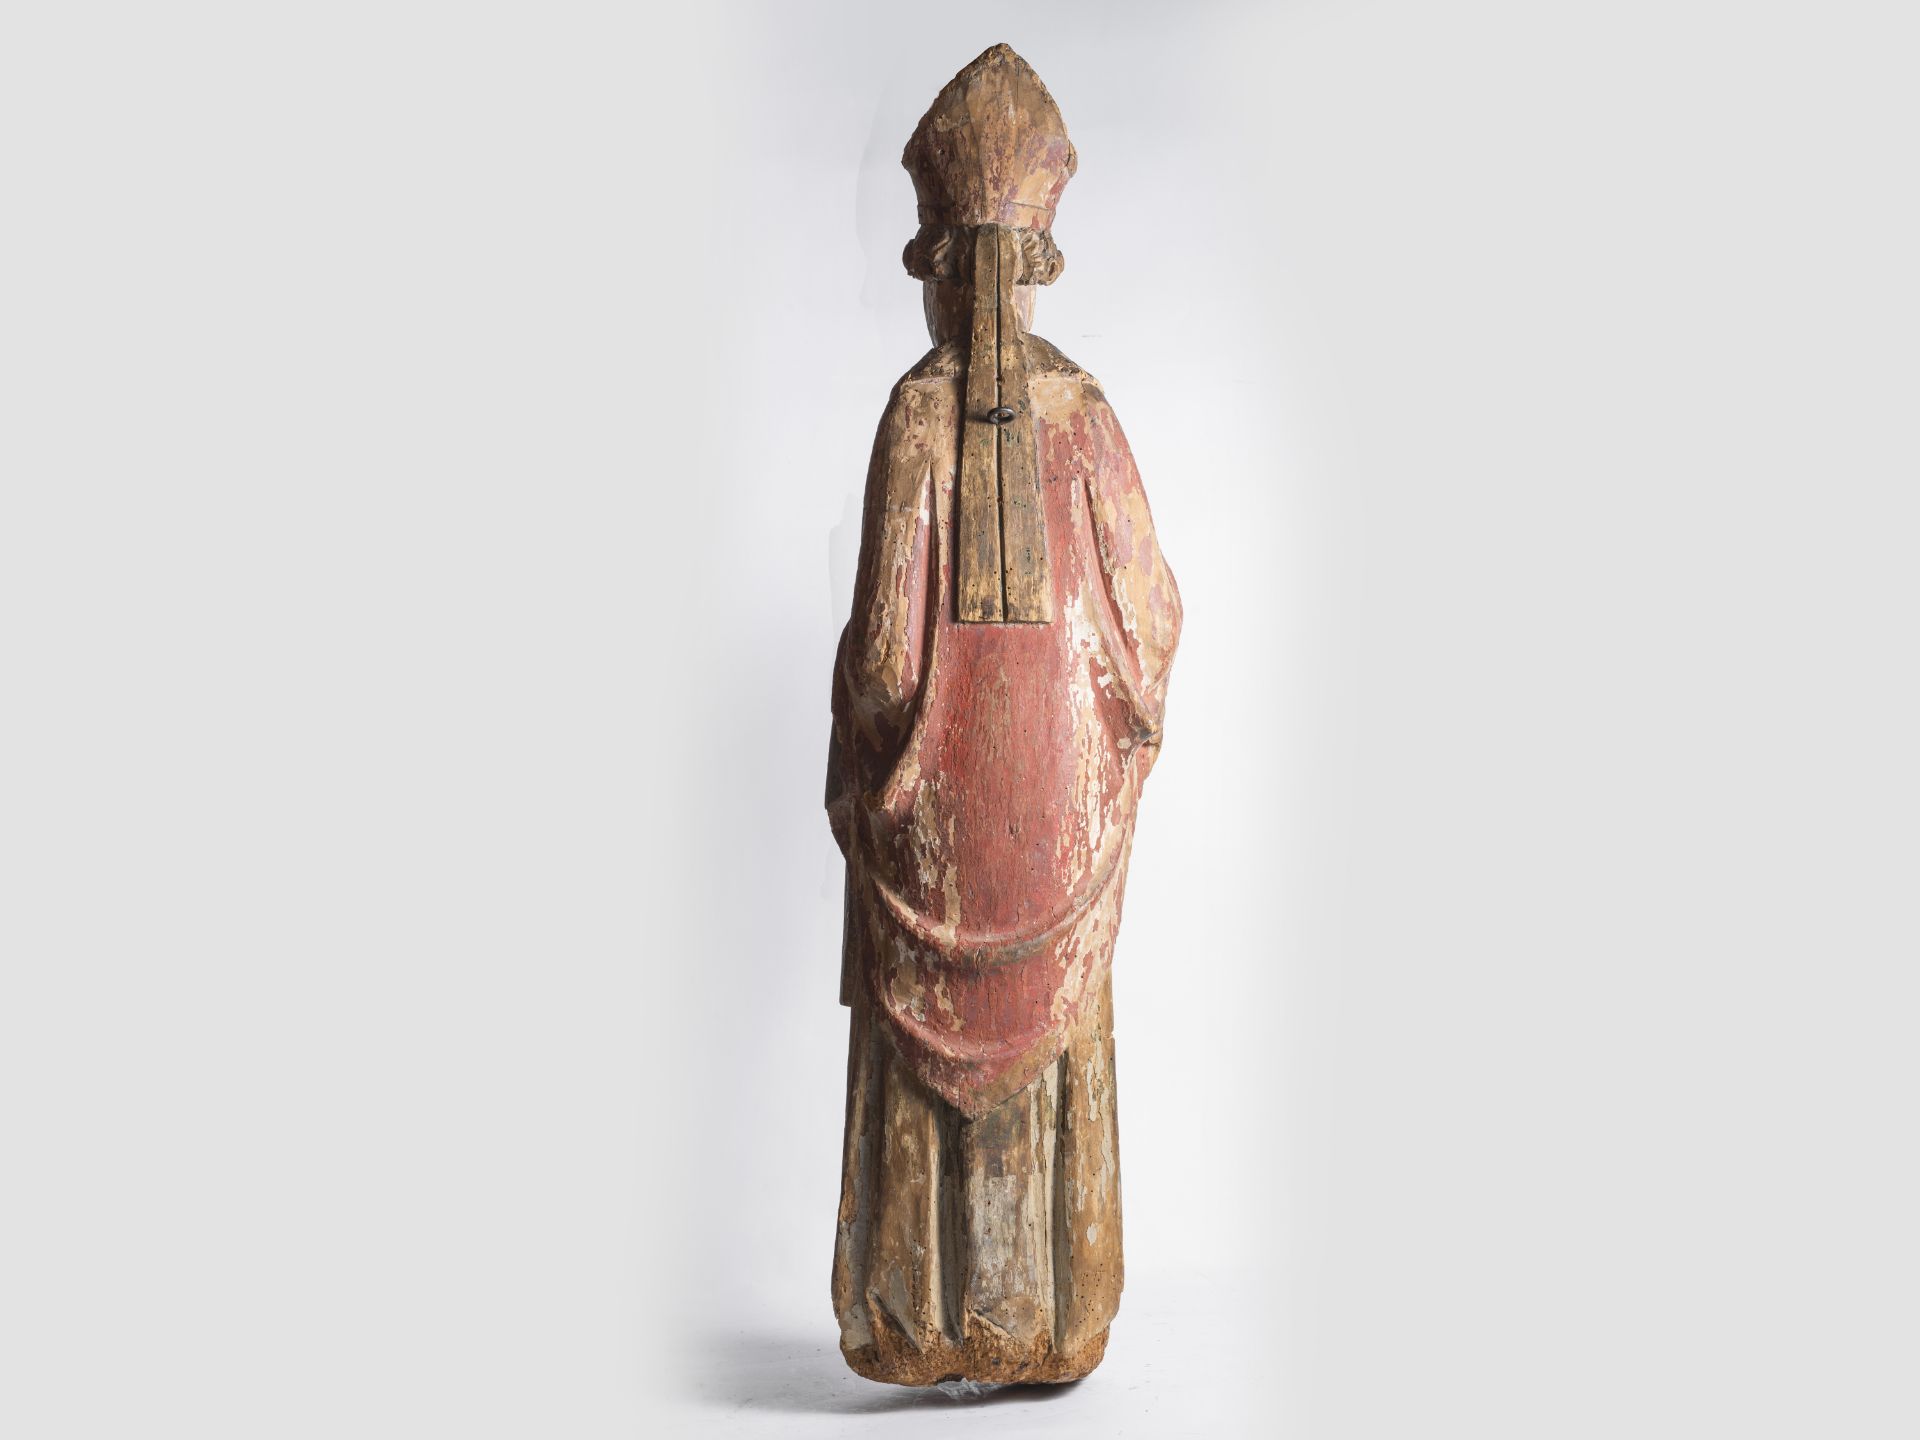 Hl. Bishop in Soft Style, Tyrol around 1400, Carved lime wood - Image 6 of 7